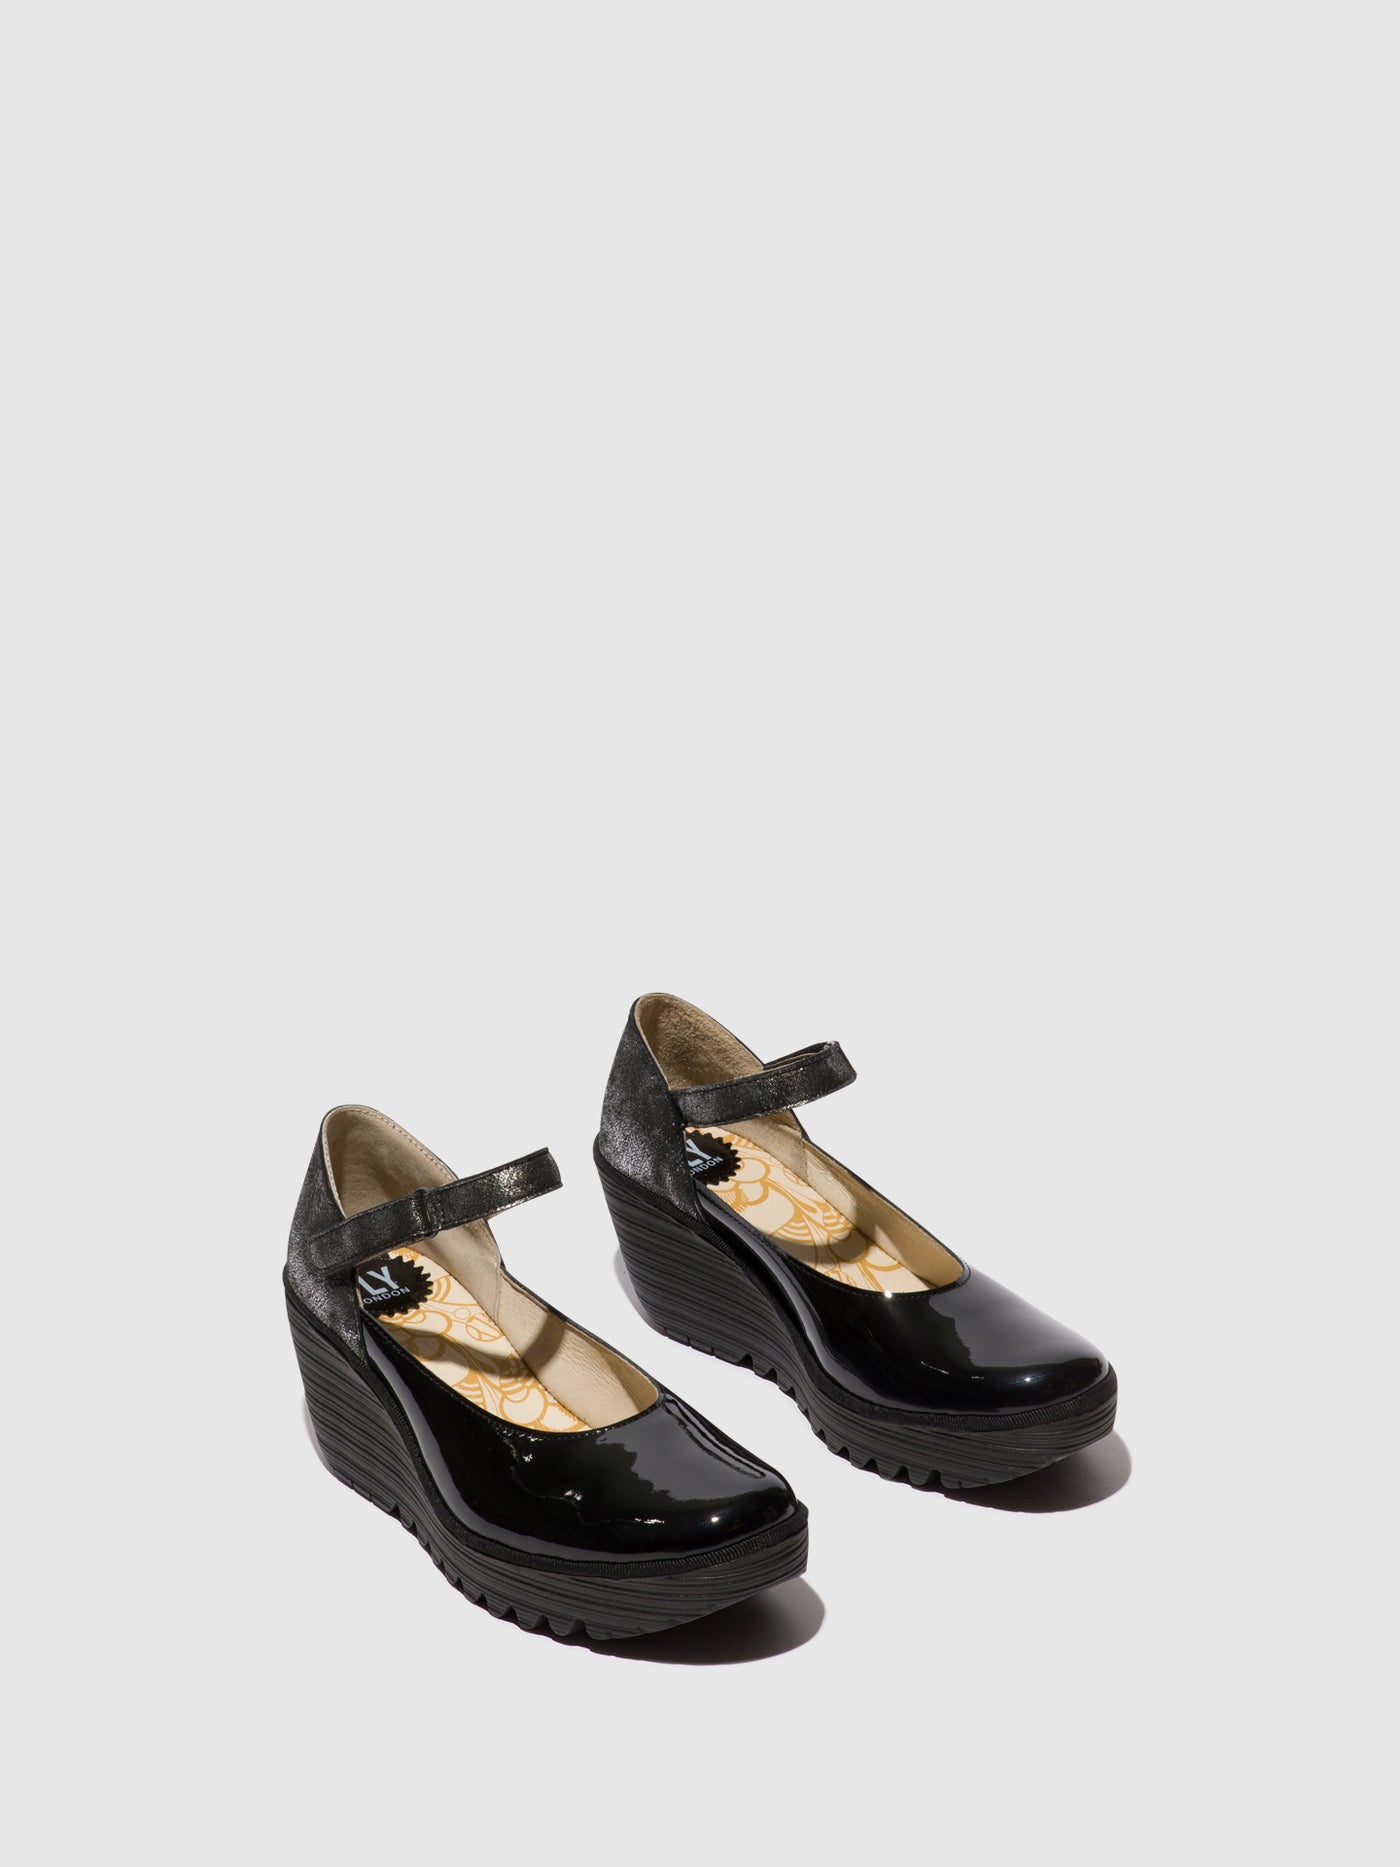 Mary Jane Shoes YAWO345FLY BLACK/SILVER